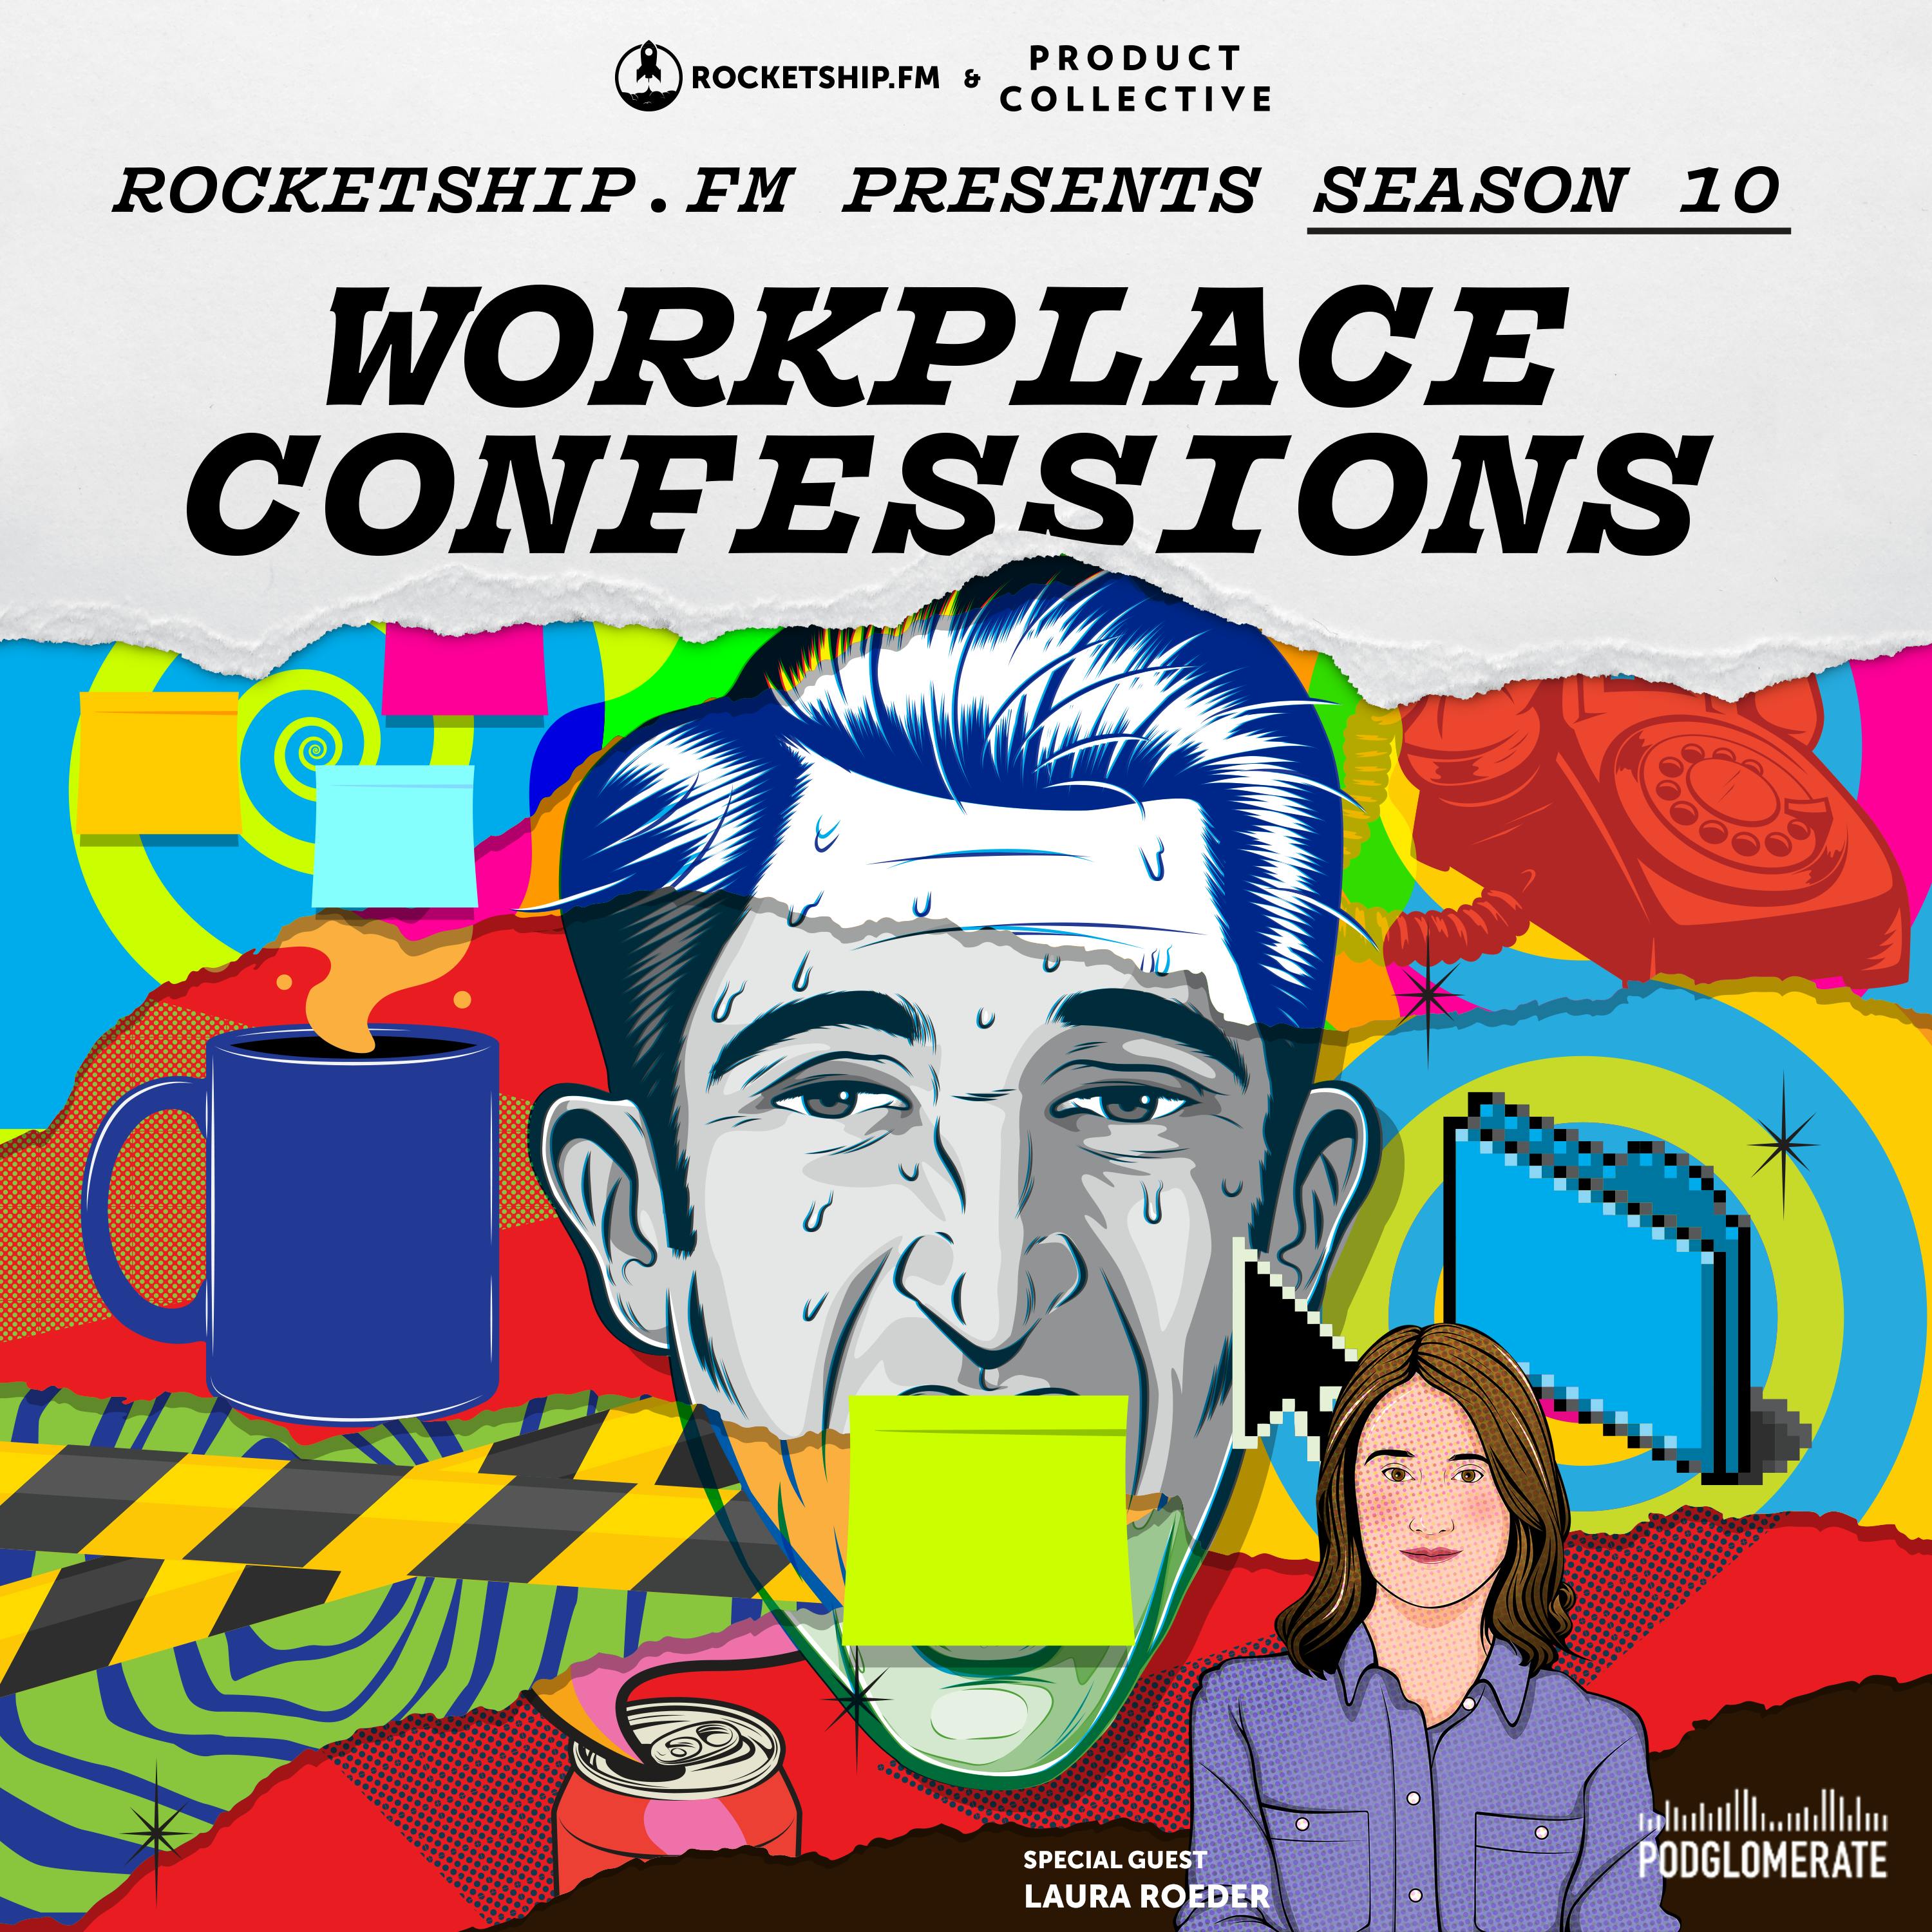 Workplace Confessions with Laura Roeder: "A Bootstrapper’s Secret" & "Should I stay or should I grow?"